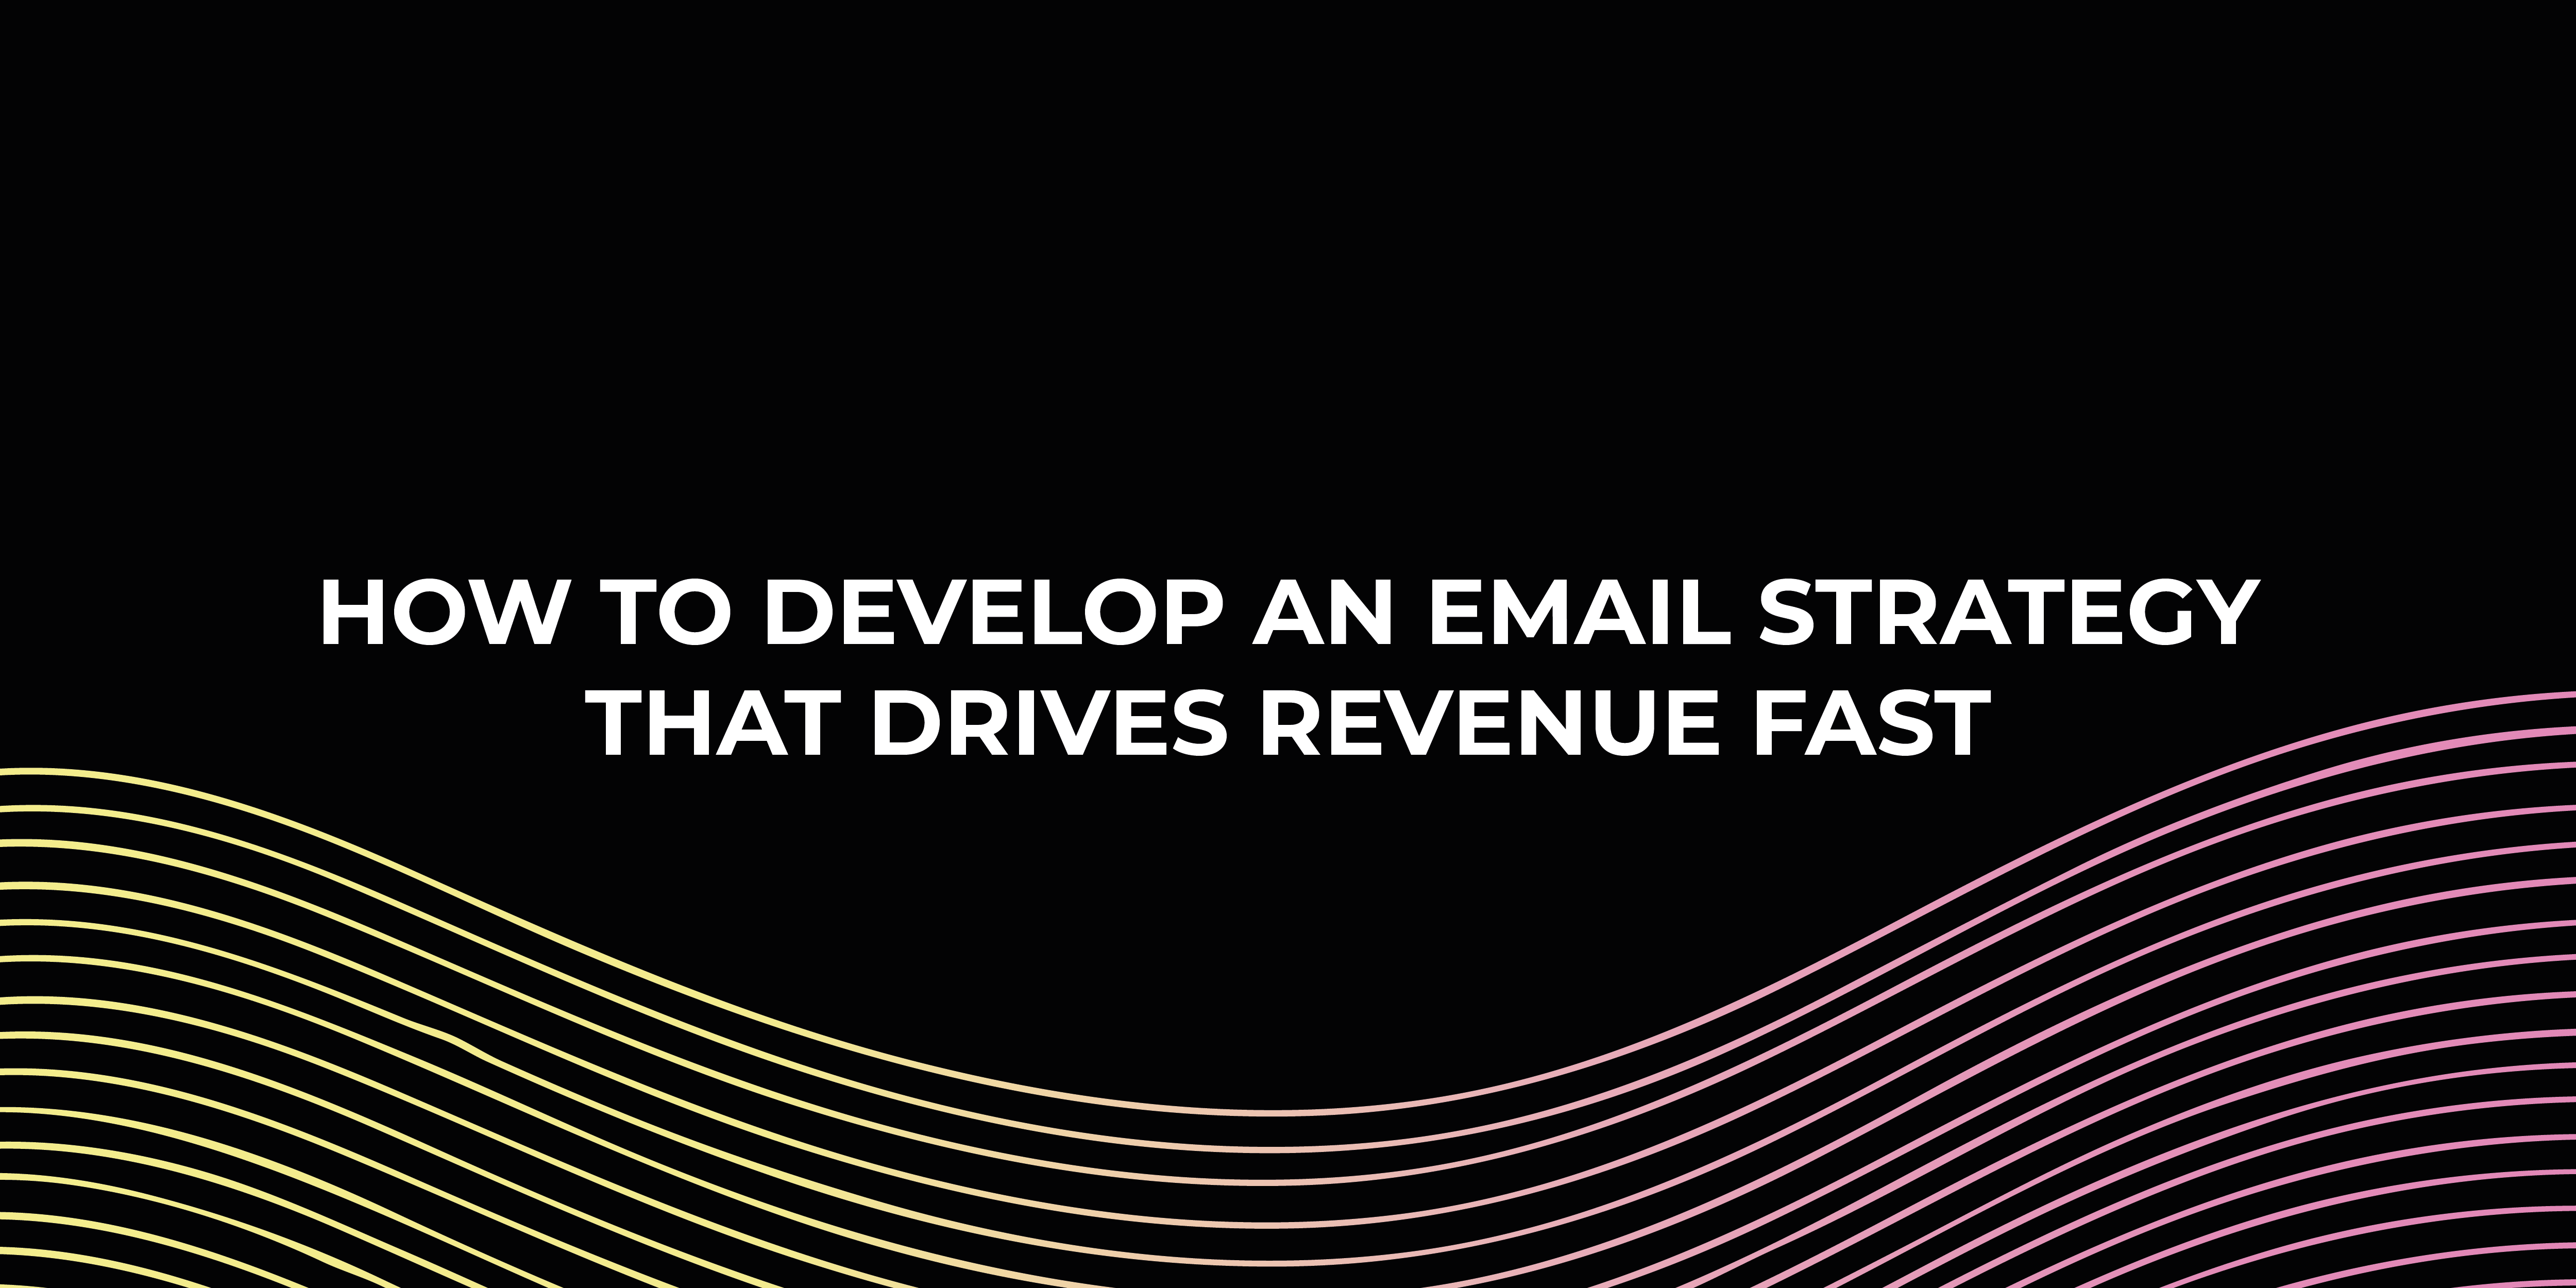 Email Strategy that drives revenue fast